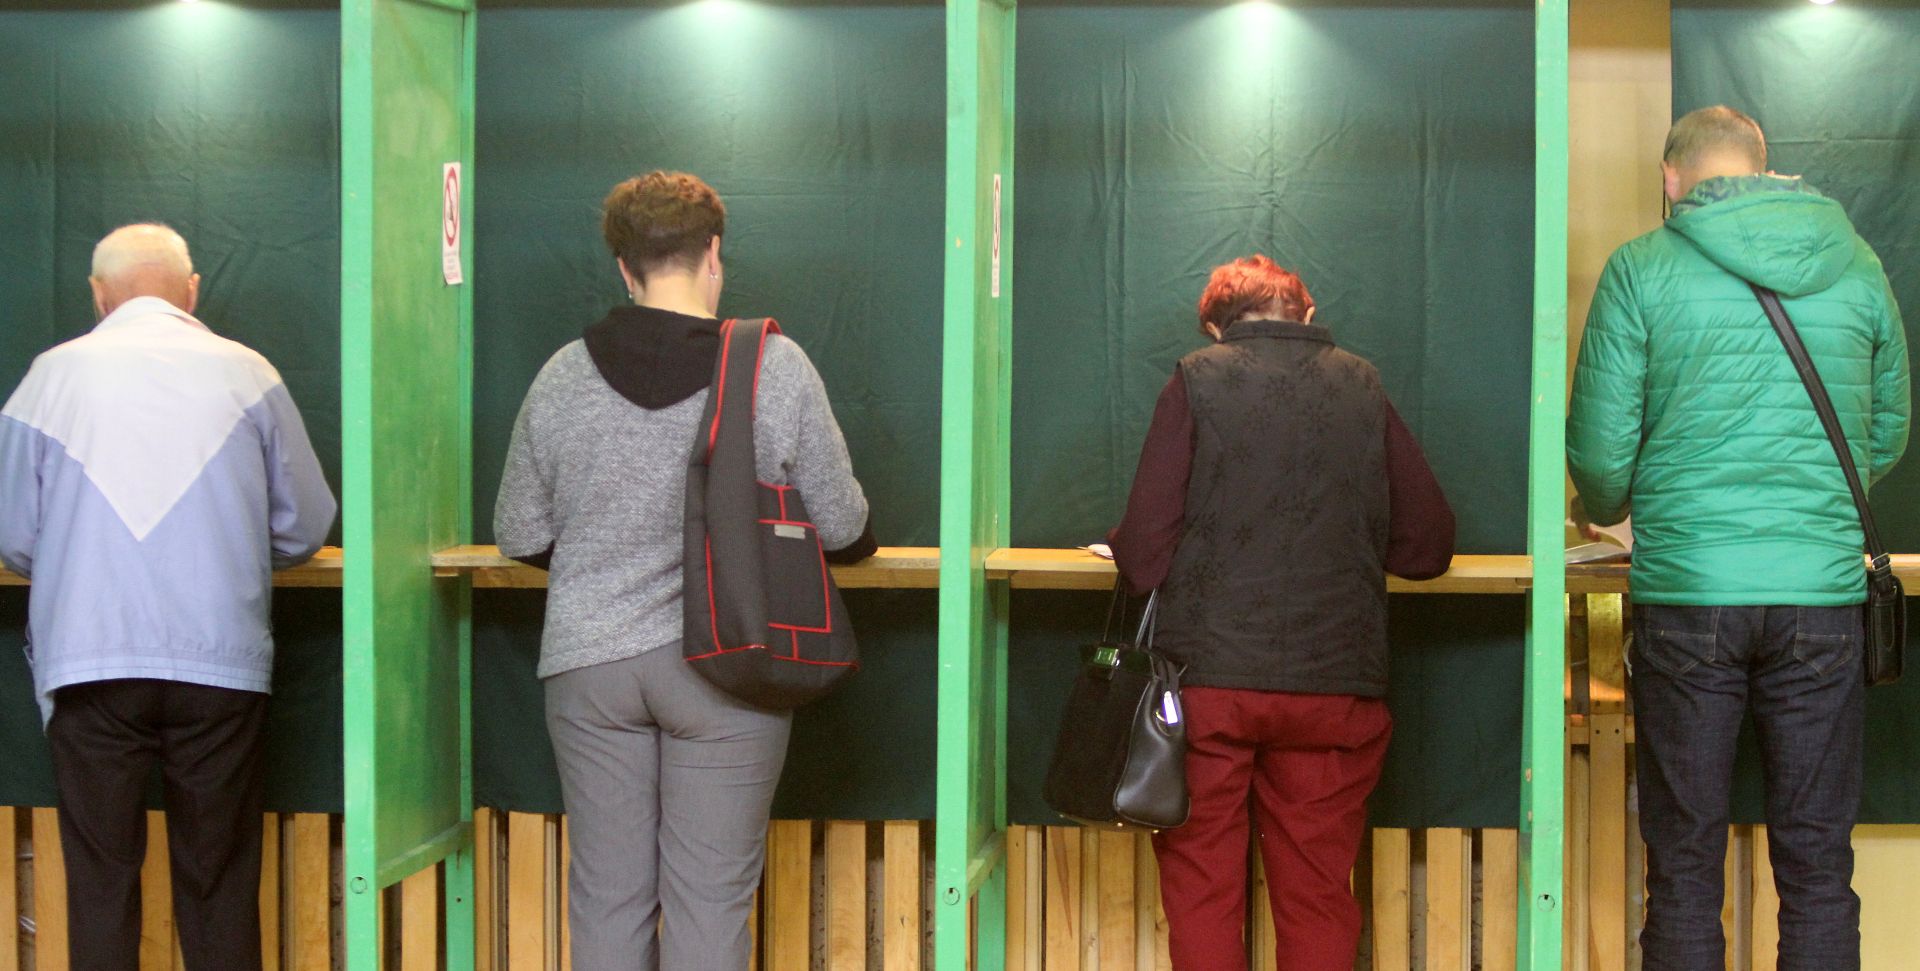 epa07601655 Voters at a polling station prior to casting their ballots at the European Parliament elections and second round of Lithuania's President elections in Pasvalys, Lithuania, 26 May 2019. Lithuania's presidential elections second round takes place on 26 May together with the European Parliament elections held by member countries of the European Union (EU) from 23 to 26 May 2019.  EPA/VALDA KALNINA